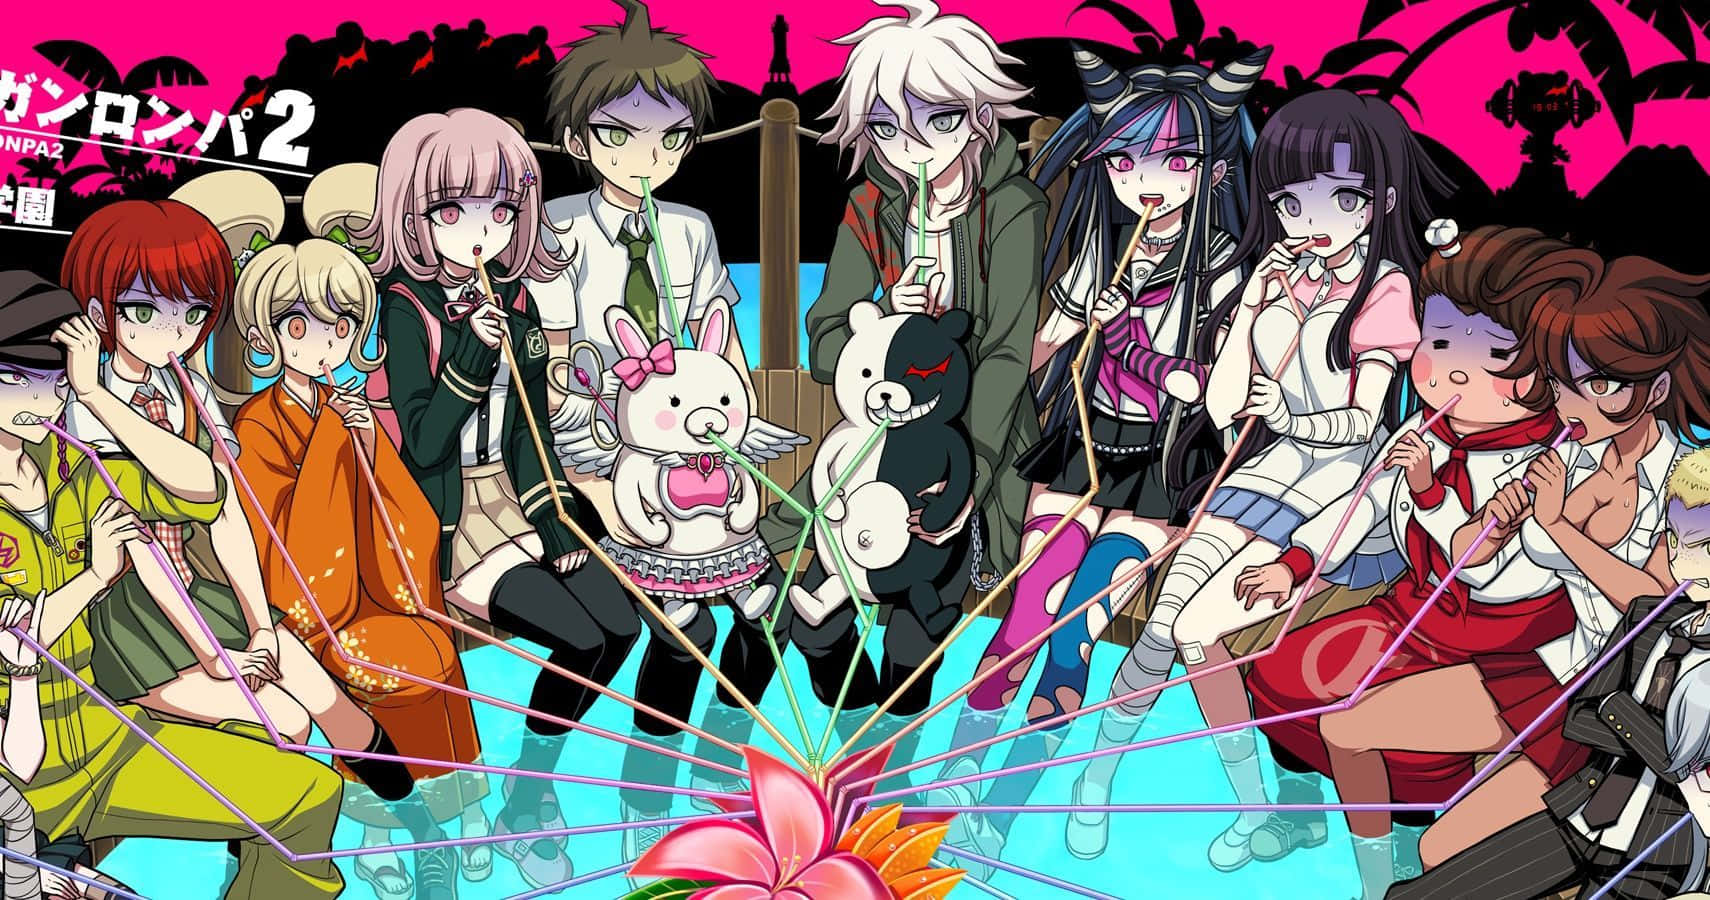 Enjoy an Exciting Adventure with Danganronpa